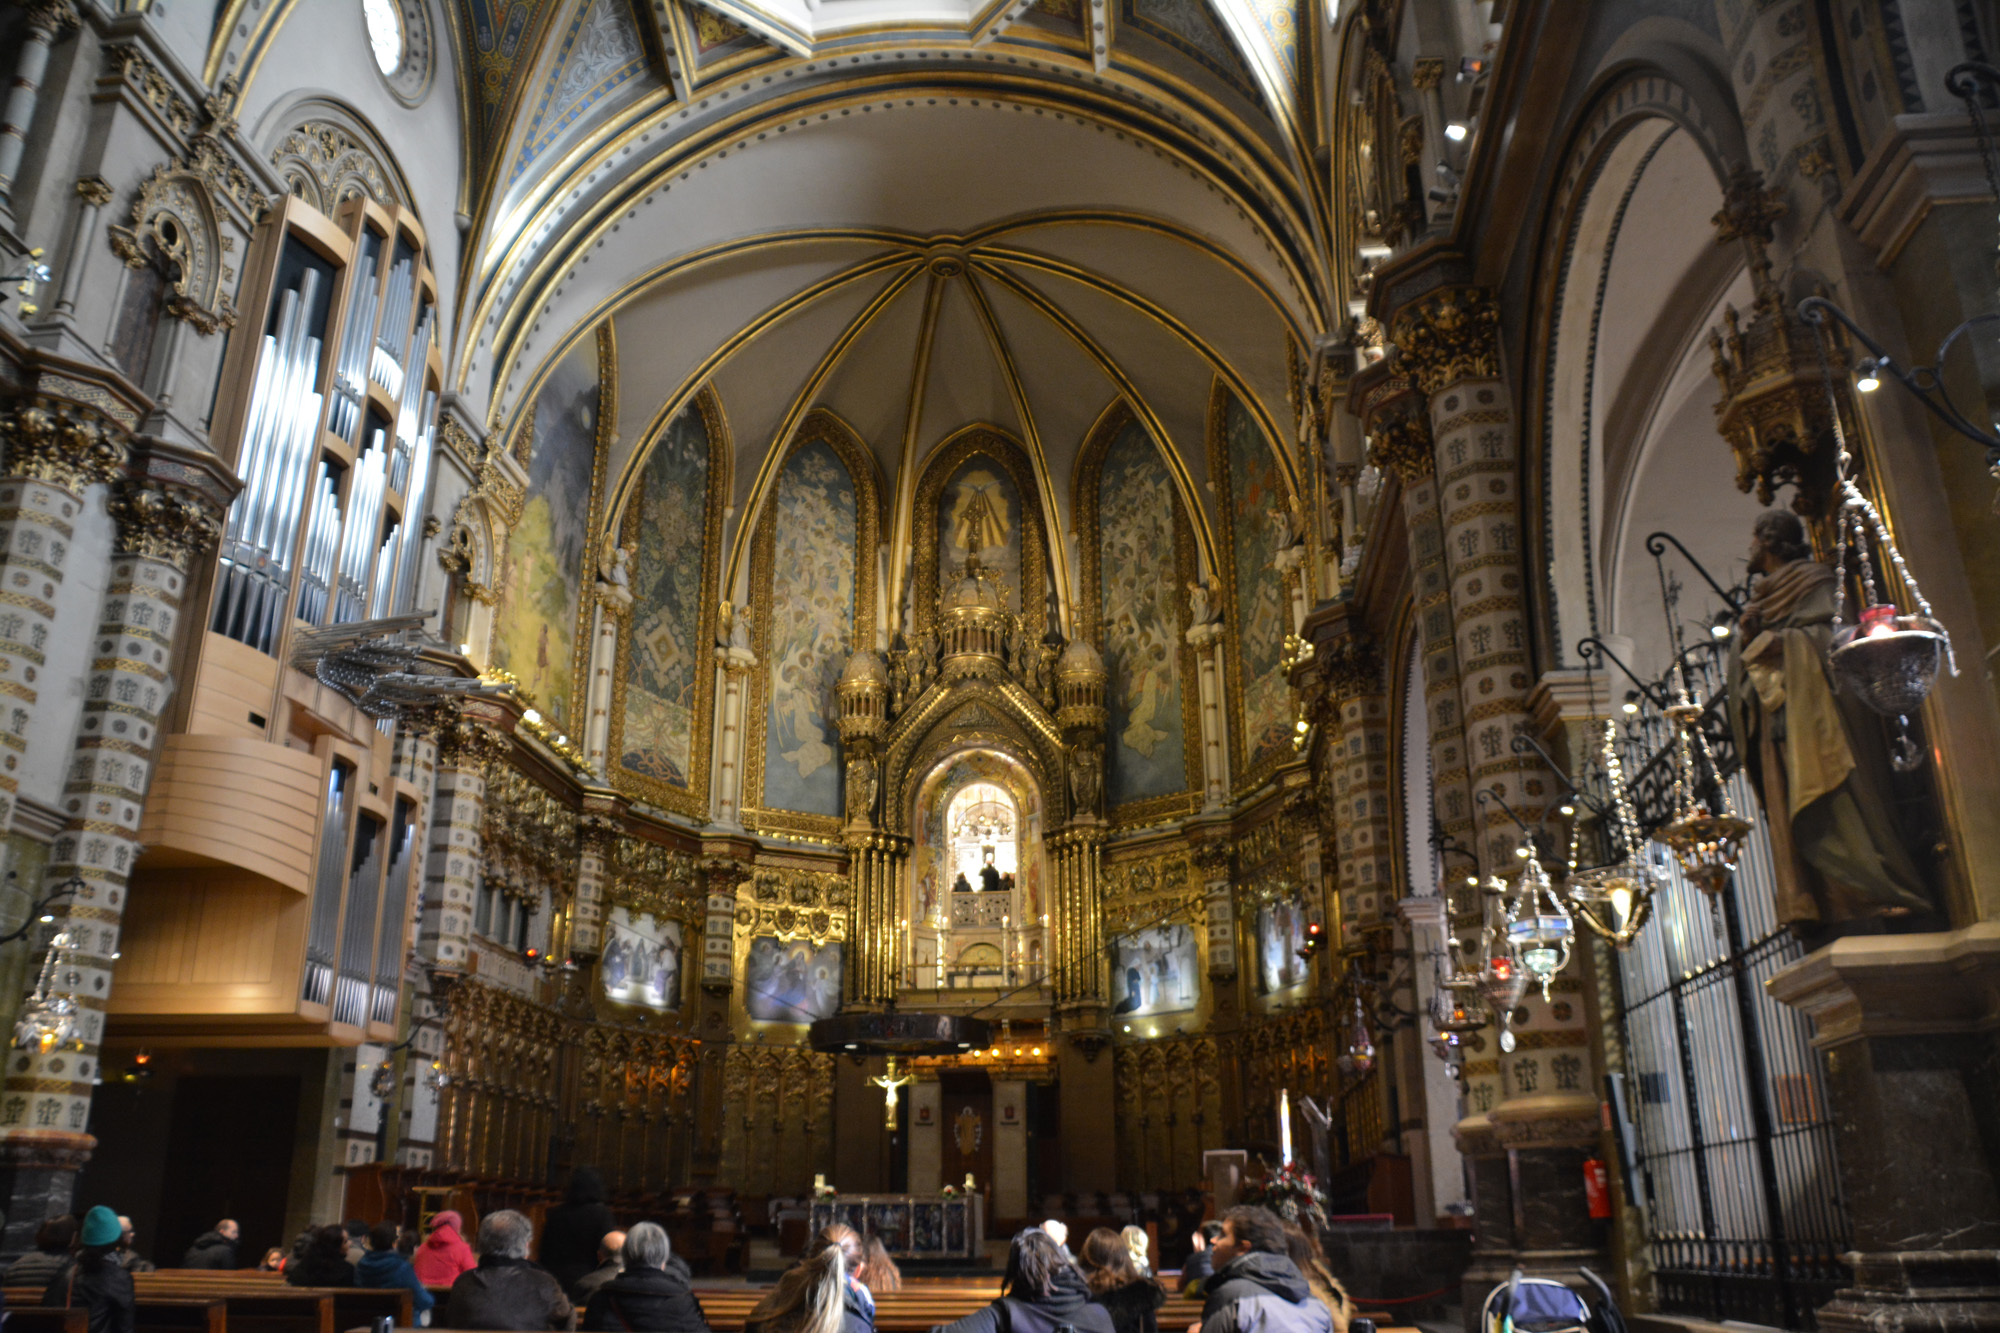 L’Escolania is a boys’ choir of sopranos and altos, singing every day in the Basilica of Montserrat, except when we there.